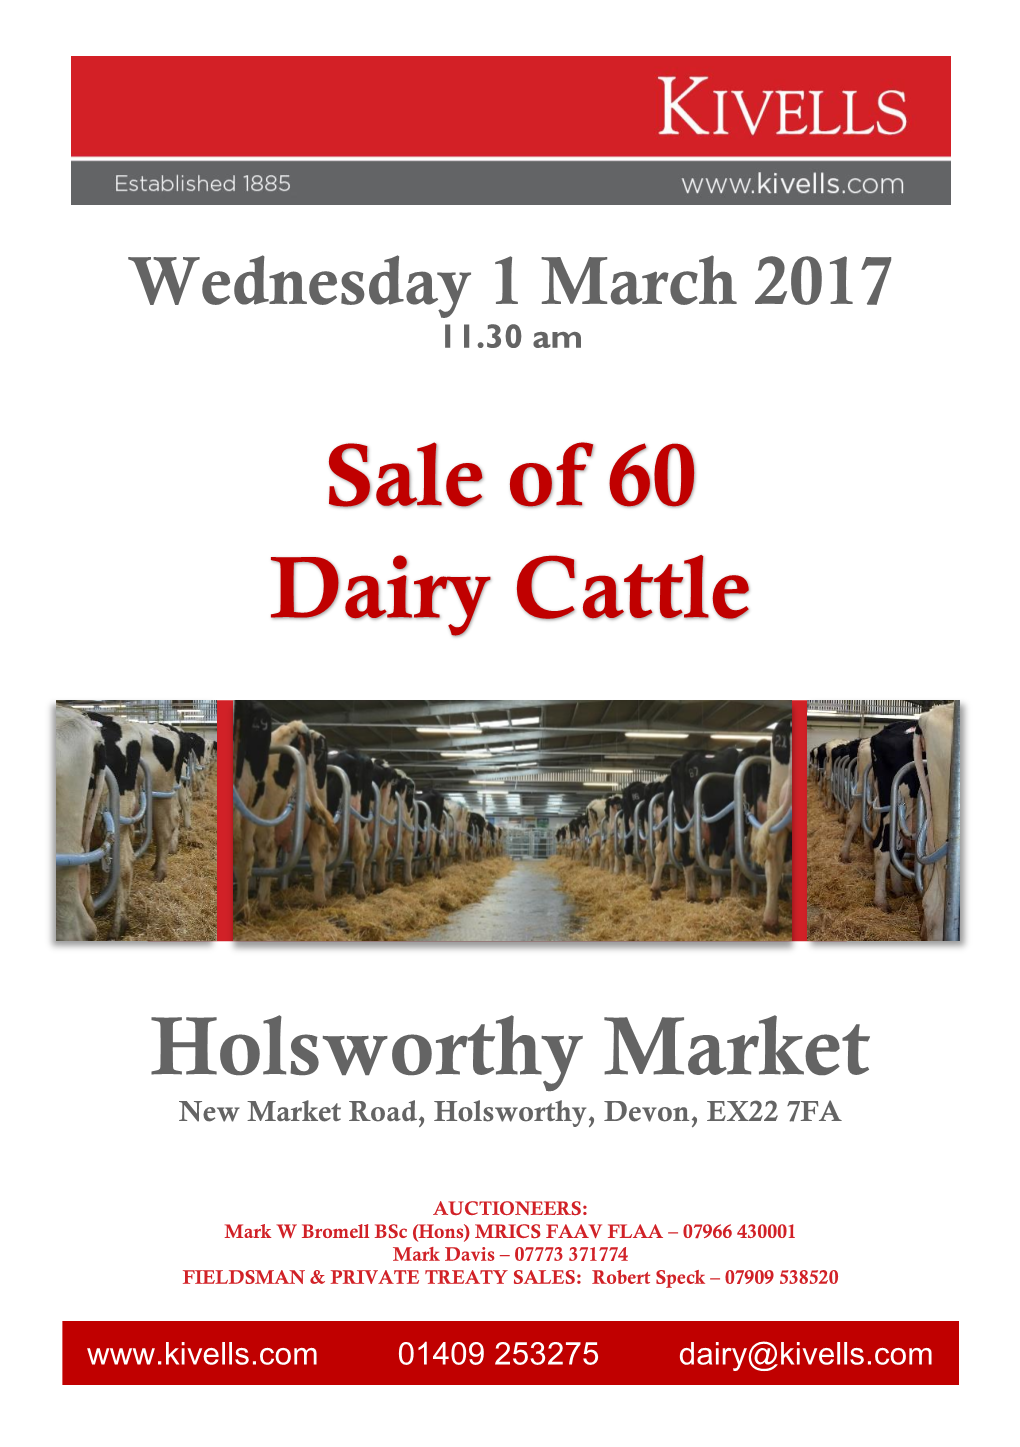 Sale of 60 Dairy Cattle